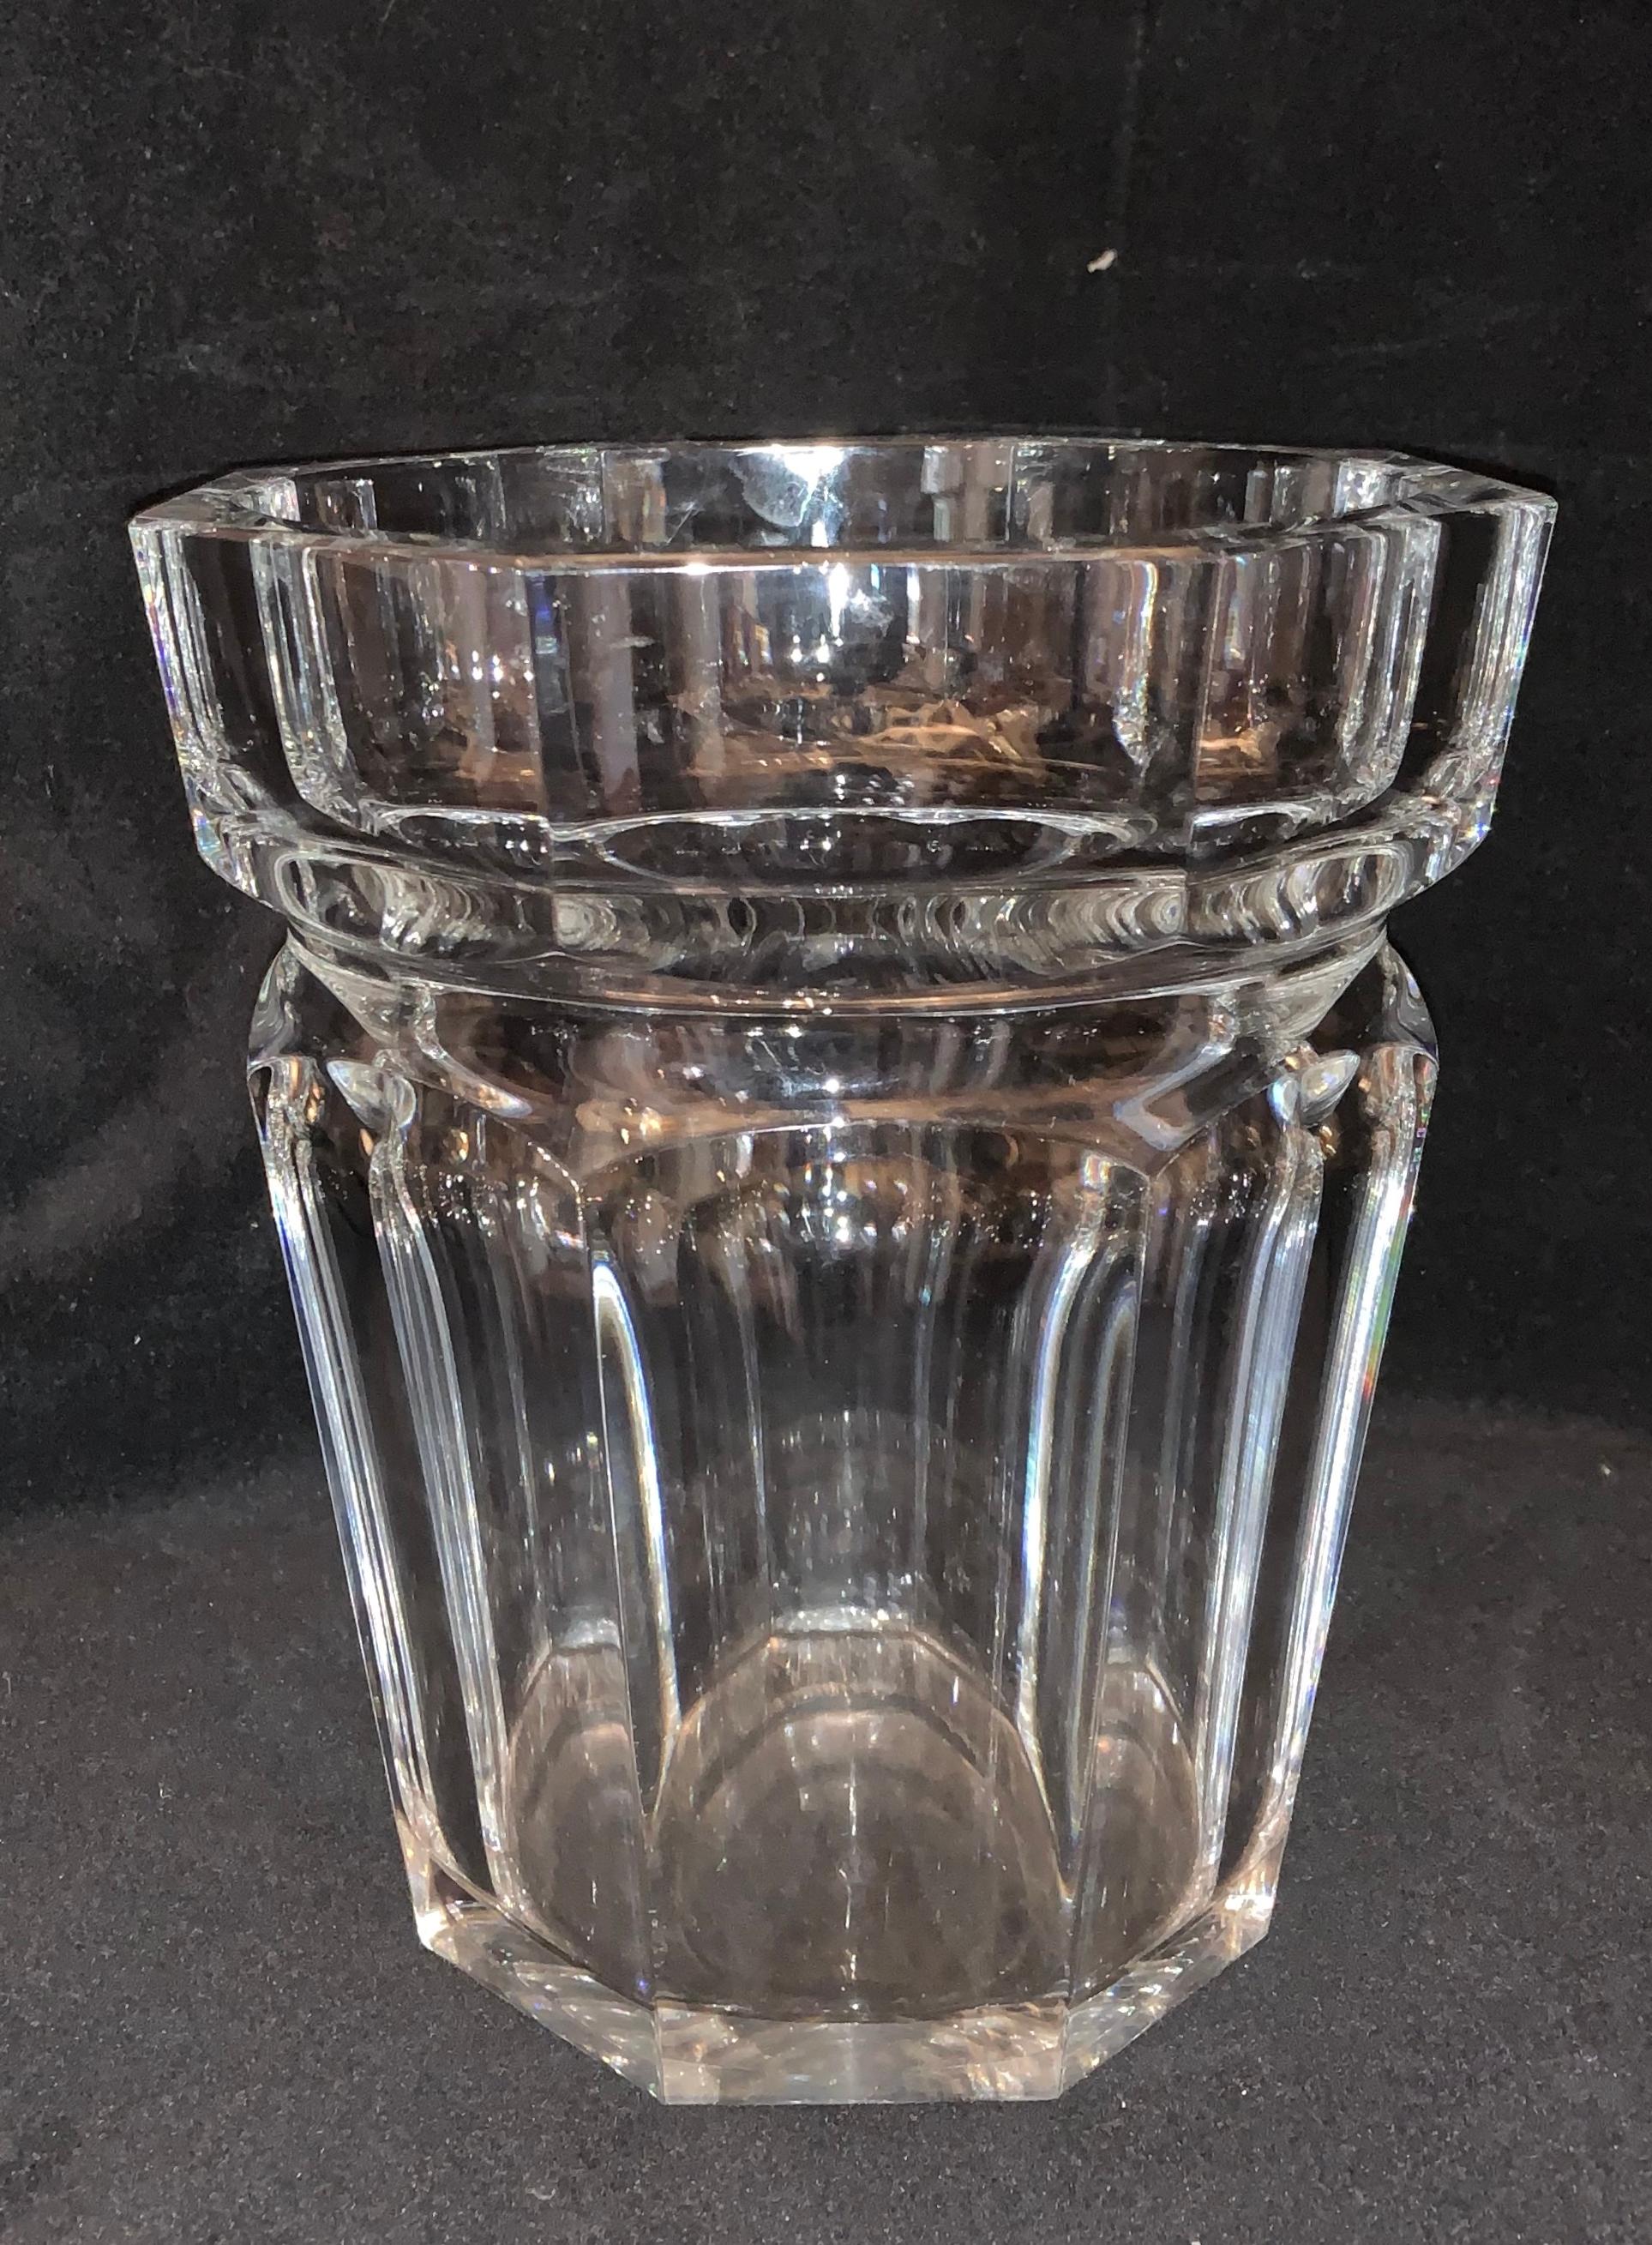 A wonderful French signed Baccarat chunky heavy crystal panel modern champagne ice bucket that also doubles as a large vase or centrepiece, truly simple and elegant.